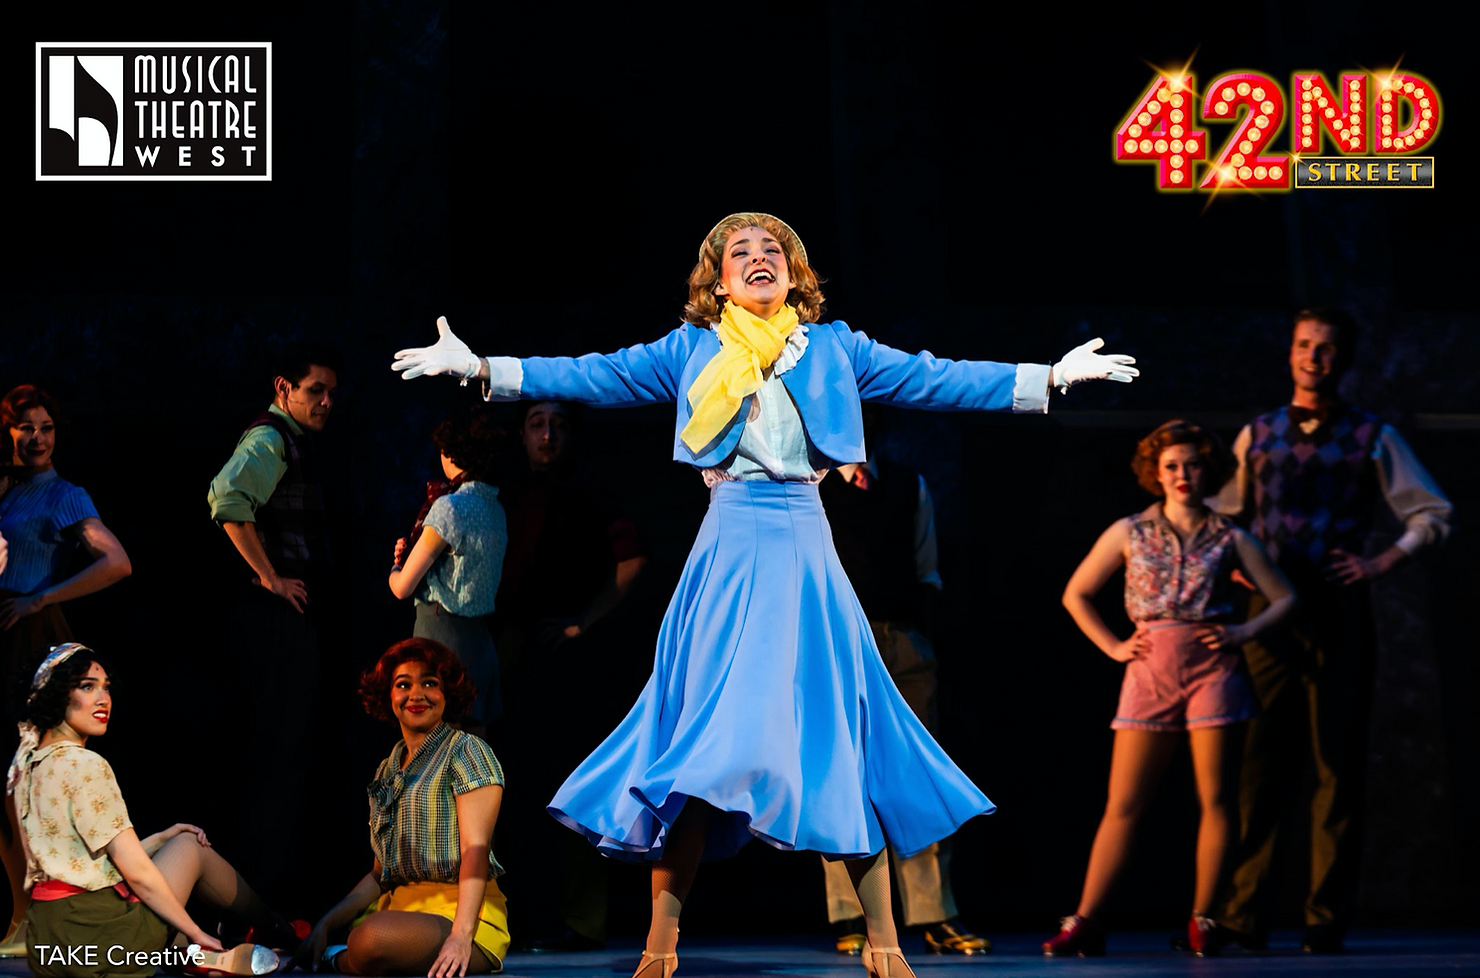 Musical Theatre West Presents: 42nd Street @ CARPENTER PERFORMING ARTS CENTER